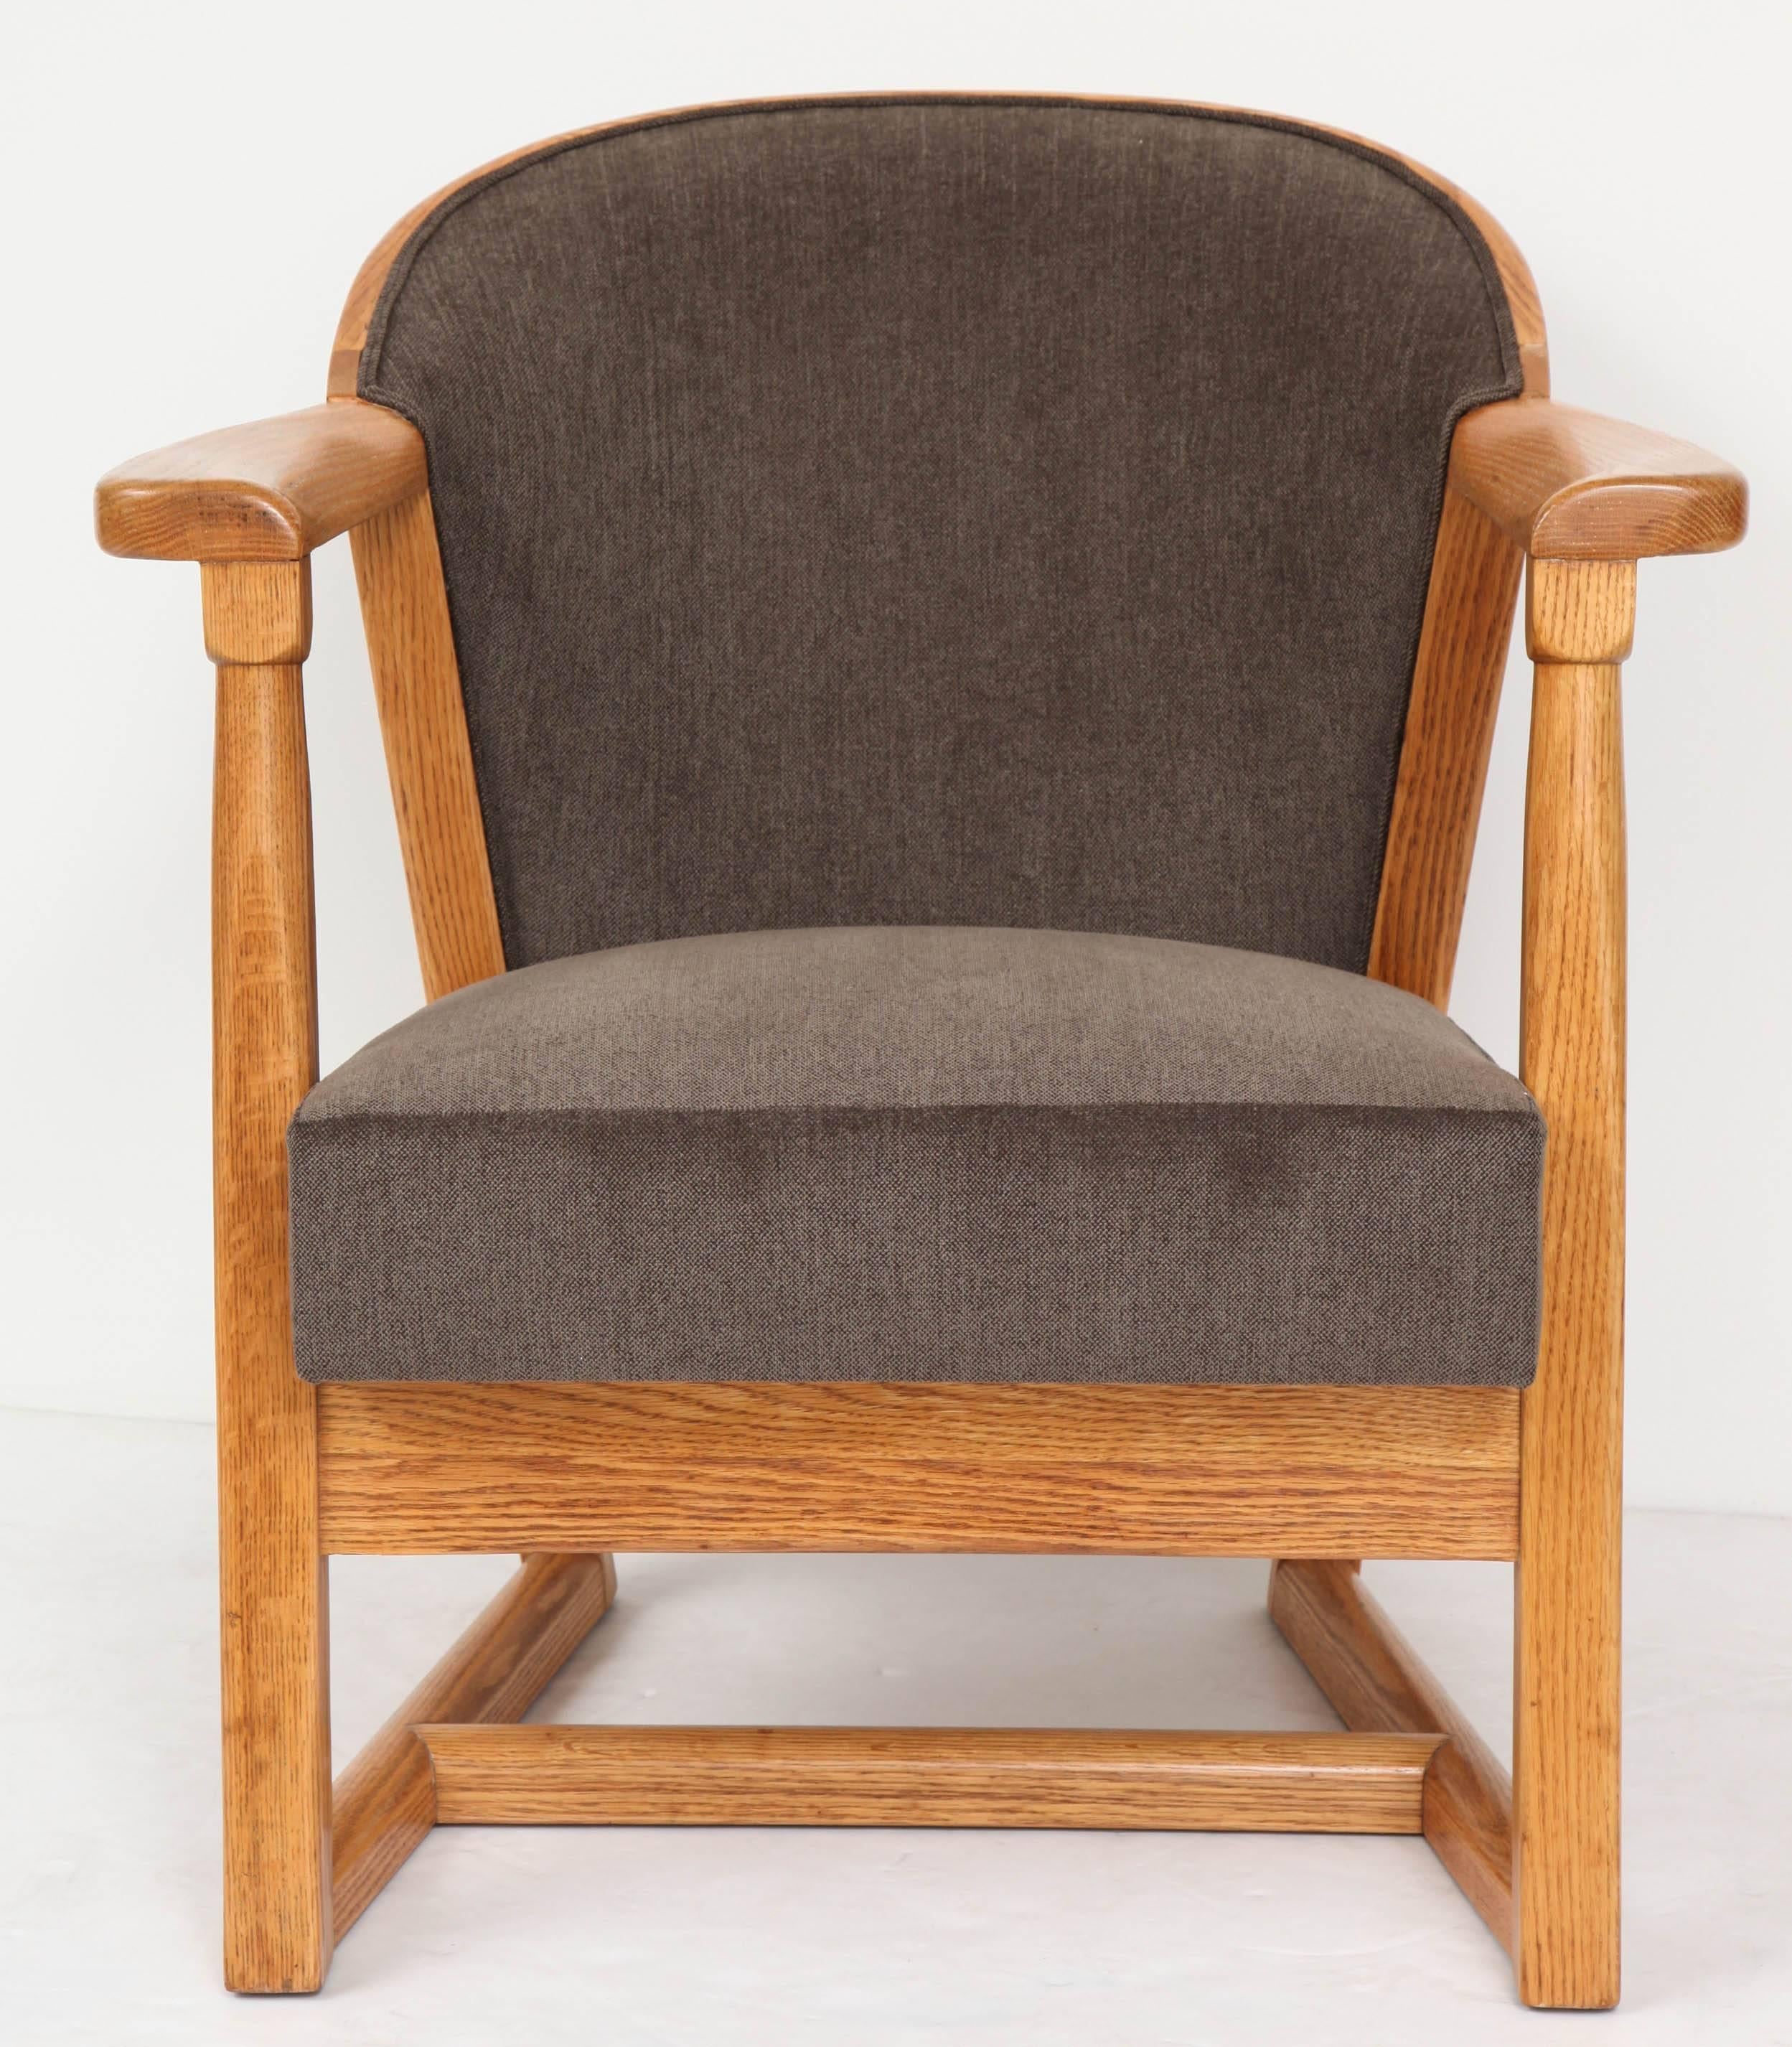 Curvaceous armchair in English oak by Jack van der Molen for Jamestown furniture, 1950s. Newly refinished and reupholstered in Knoll velour.